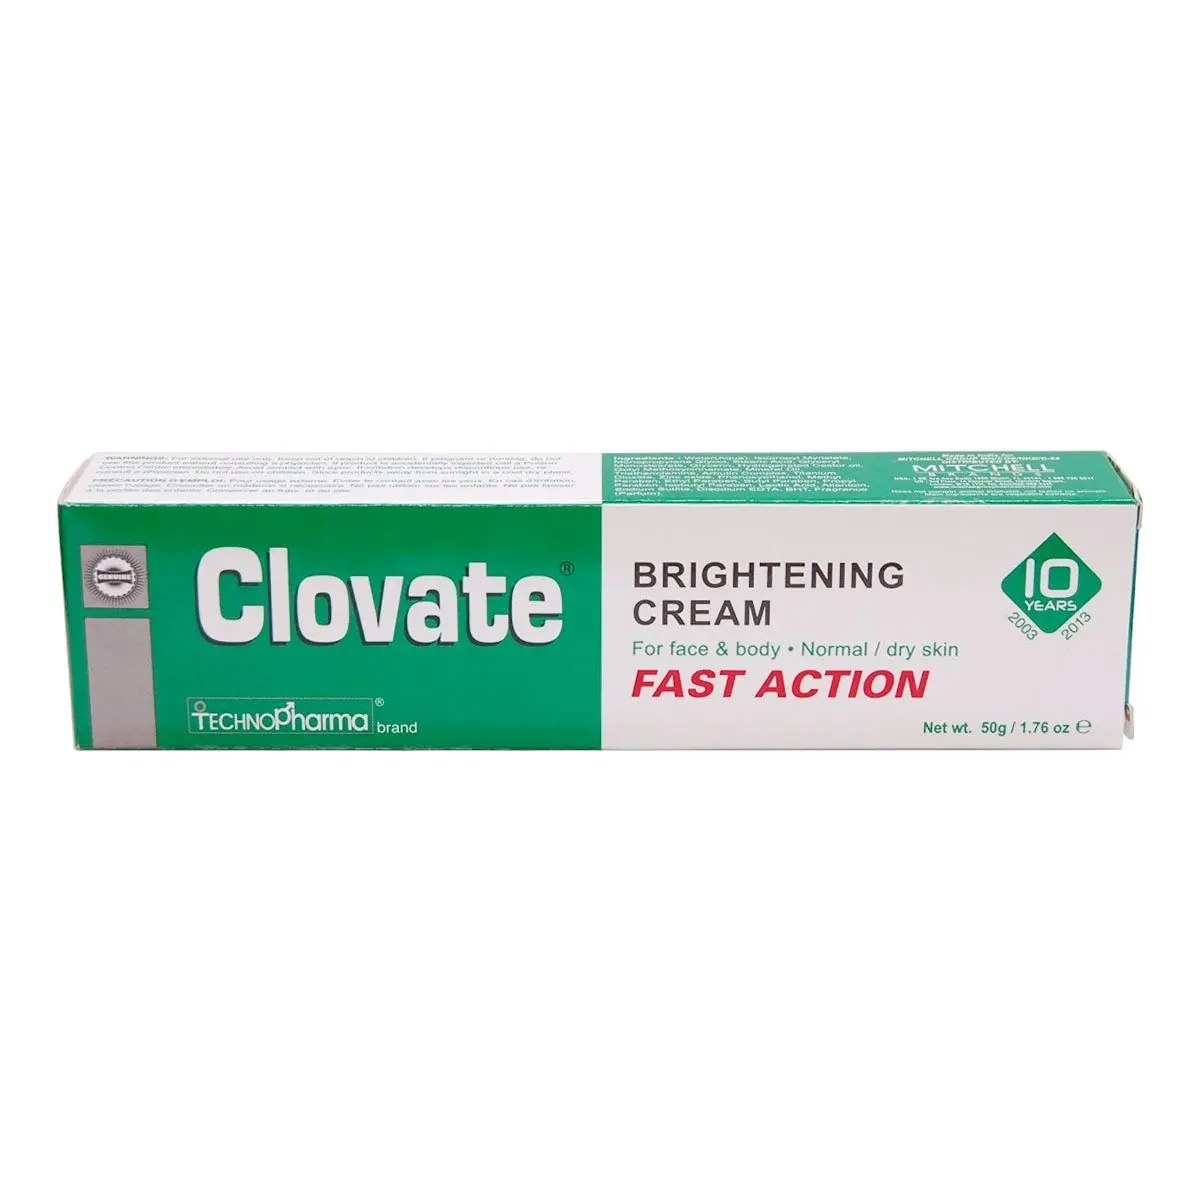 Clovate Brightening Cream For Face & Body (Normal/Dry Skin) FAST ACTION 1.76oz